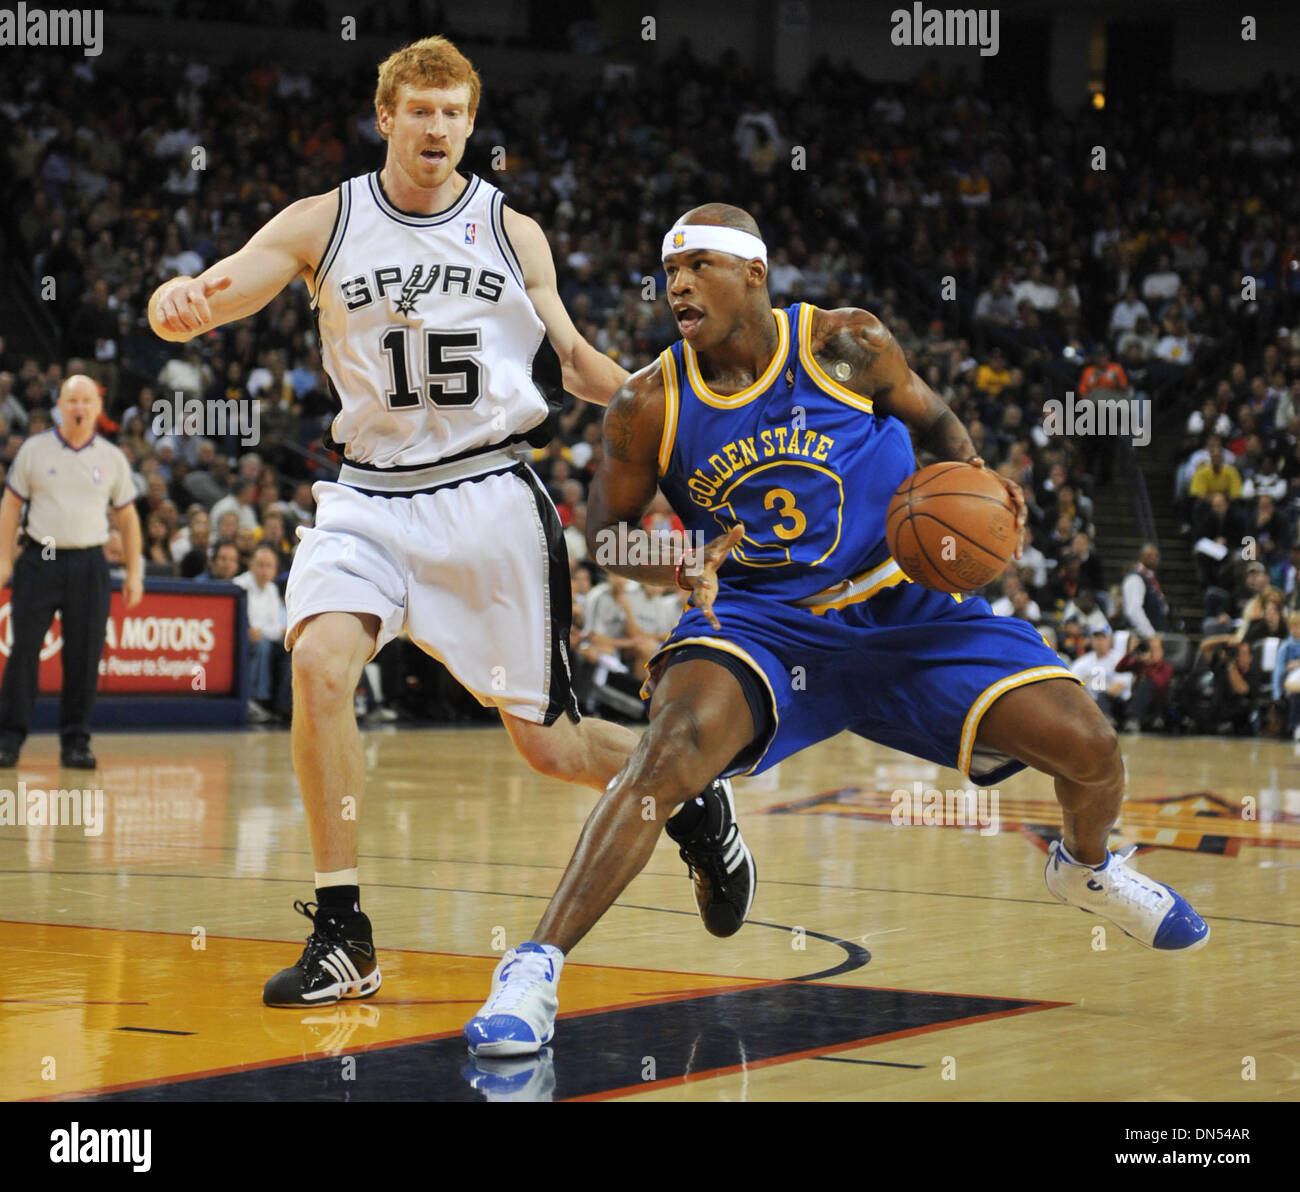 Golden State Warriors Al Harrington prepares to go up for a shot over San  Antonio Spurs' Matt Bonner in the 1st quarter of their game at Oracle Arena  in Oakland Calif., Tuesday,